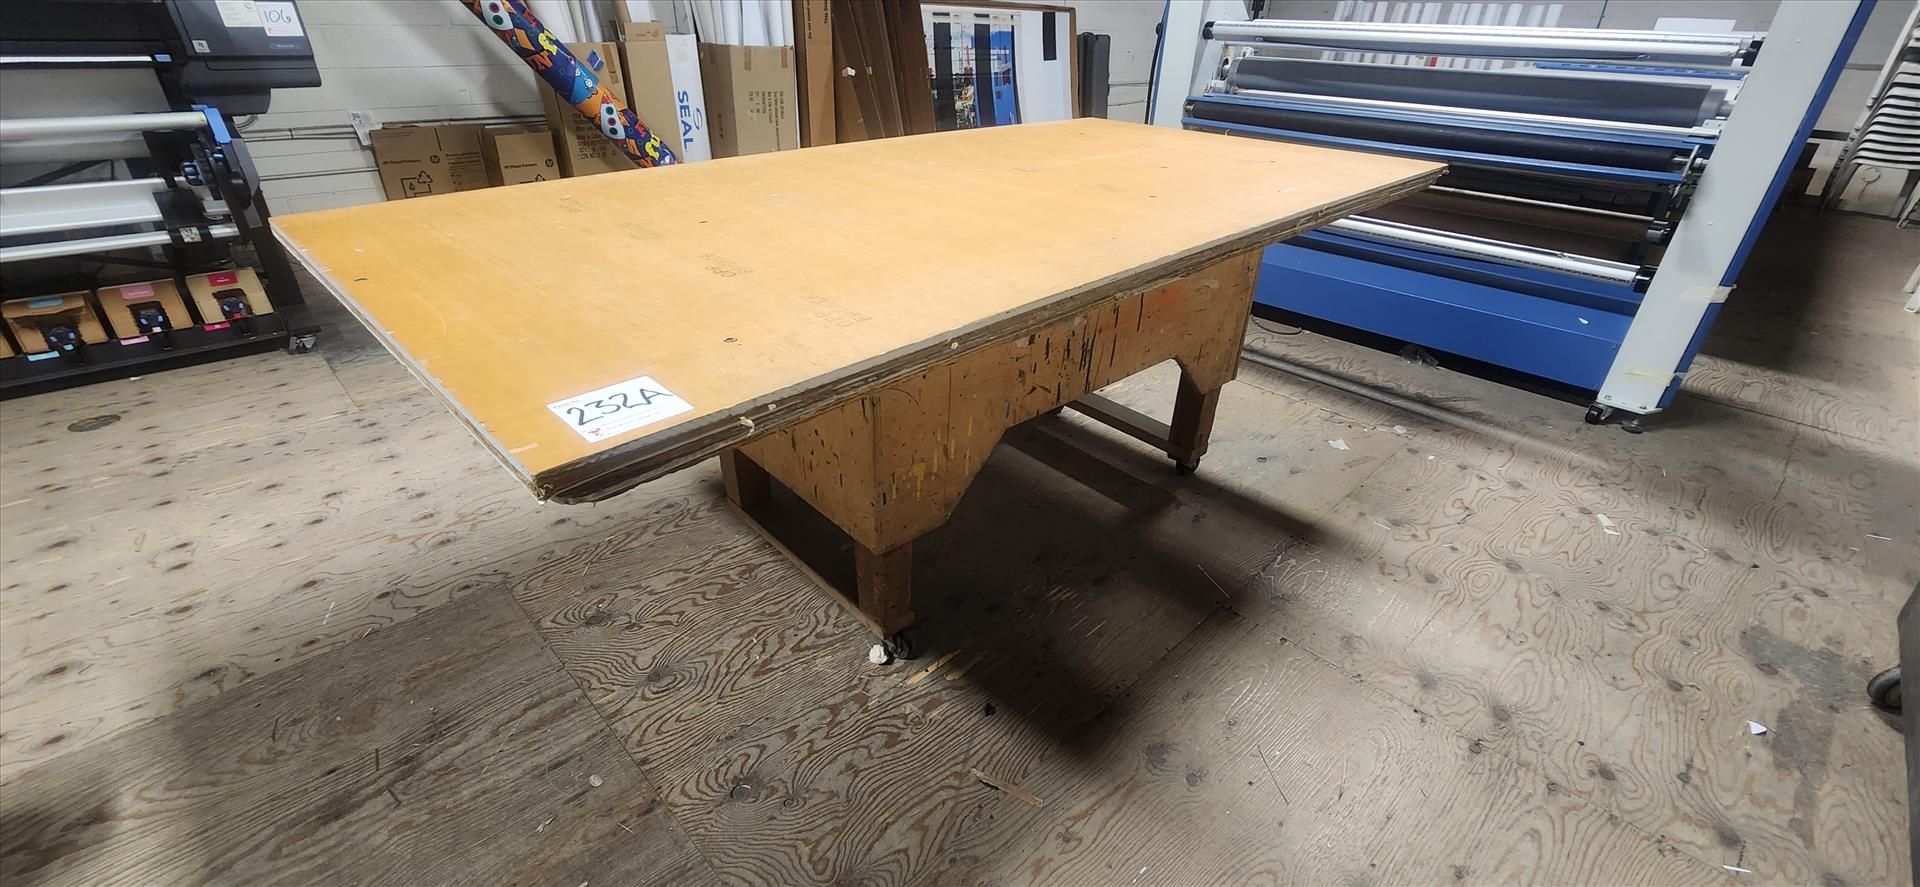 wooden table w/ casters, approx. 48 in. x 96 in. (excluding contents)